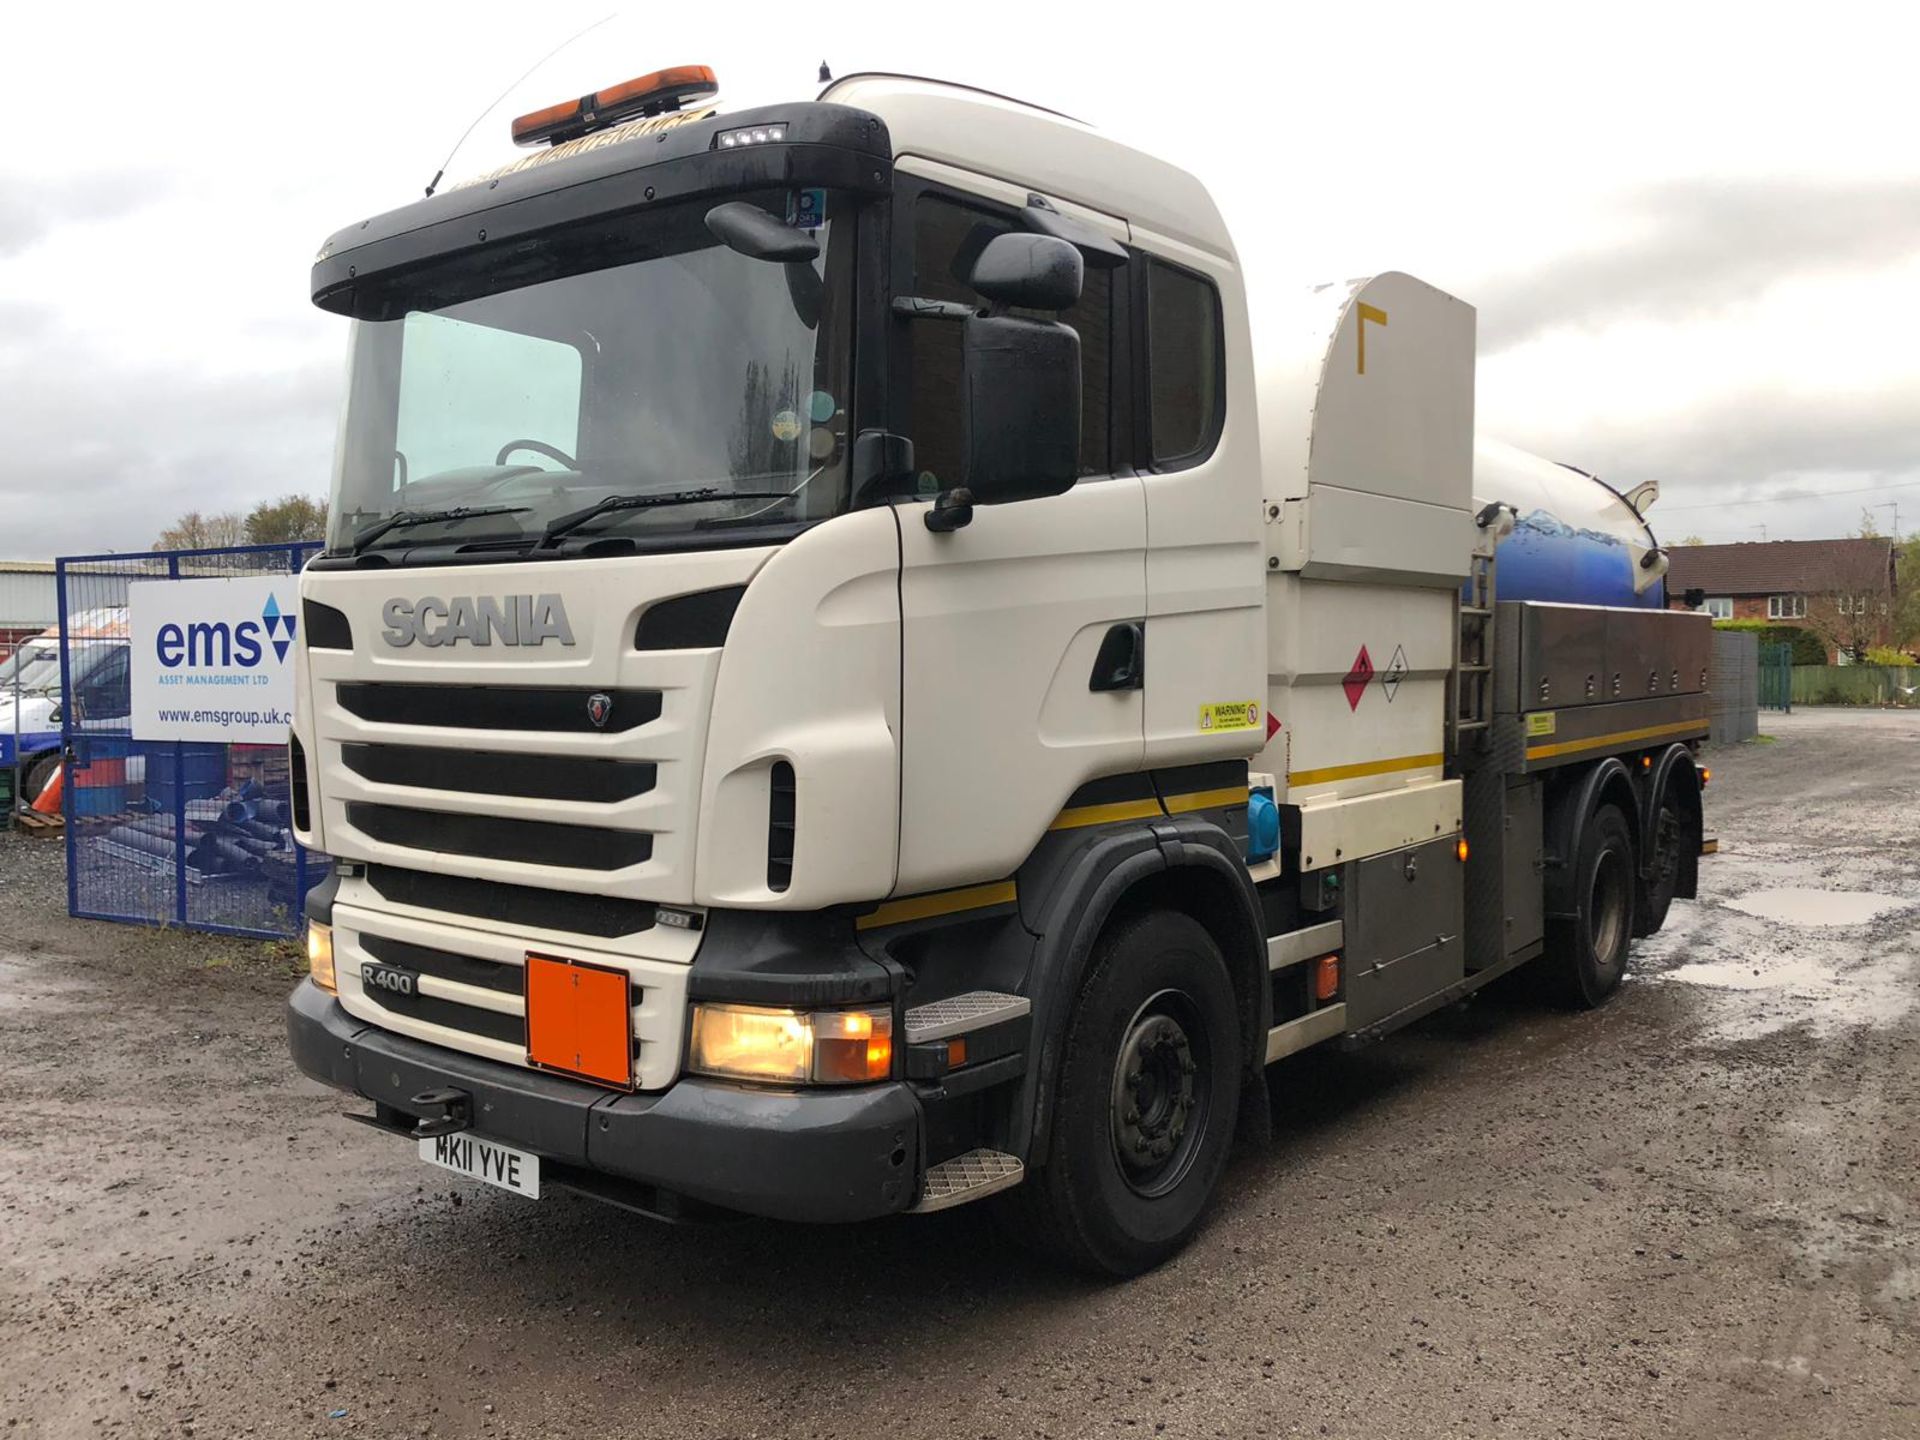 2011 Scania R-SRS L-CLASS 2500 Gallon Stainless Steel Fuller Tanker ADR EURO 5 - Image 2 of 17